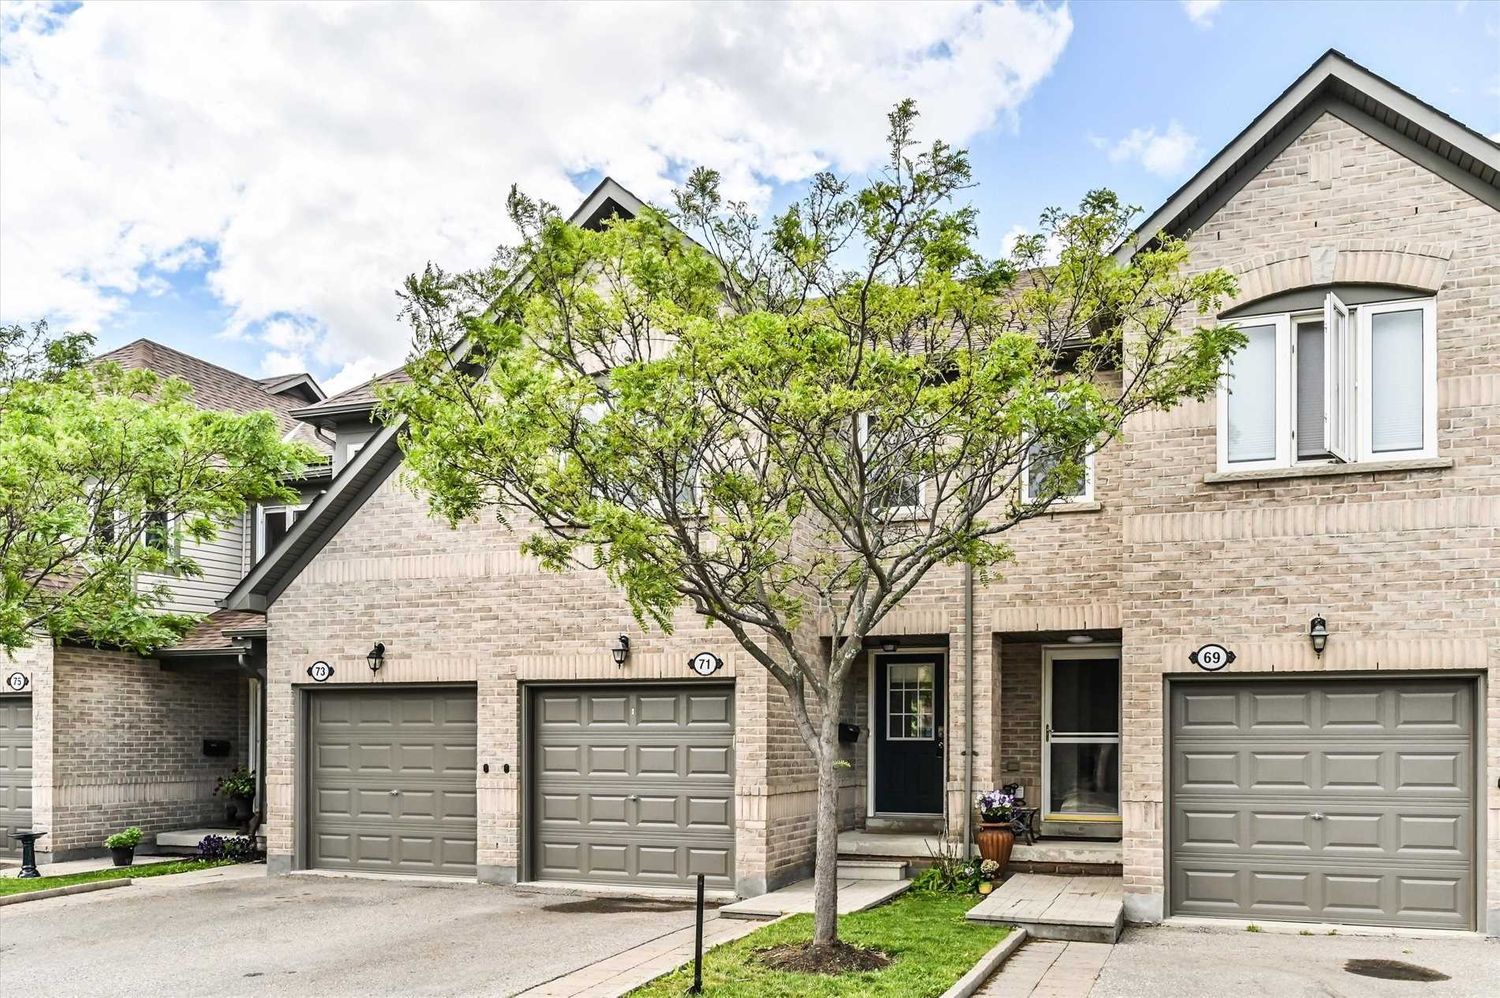 86 Joymar Drive. Streetsville Walk Townhomes is located in  Mississauga, Toronto - image #2 of 2